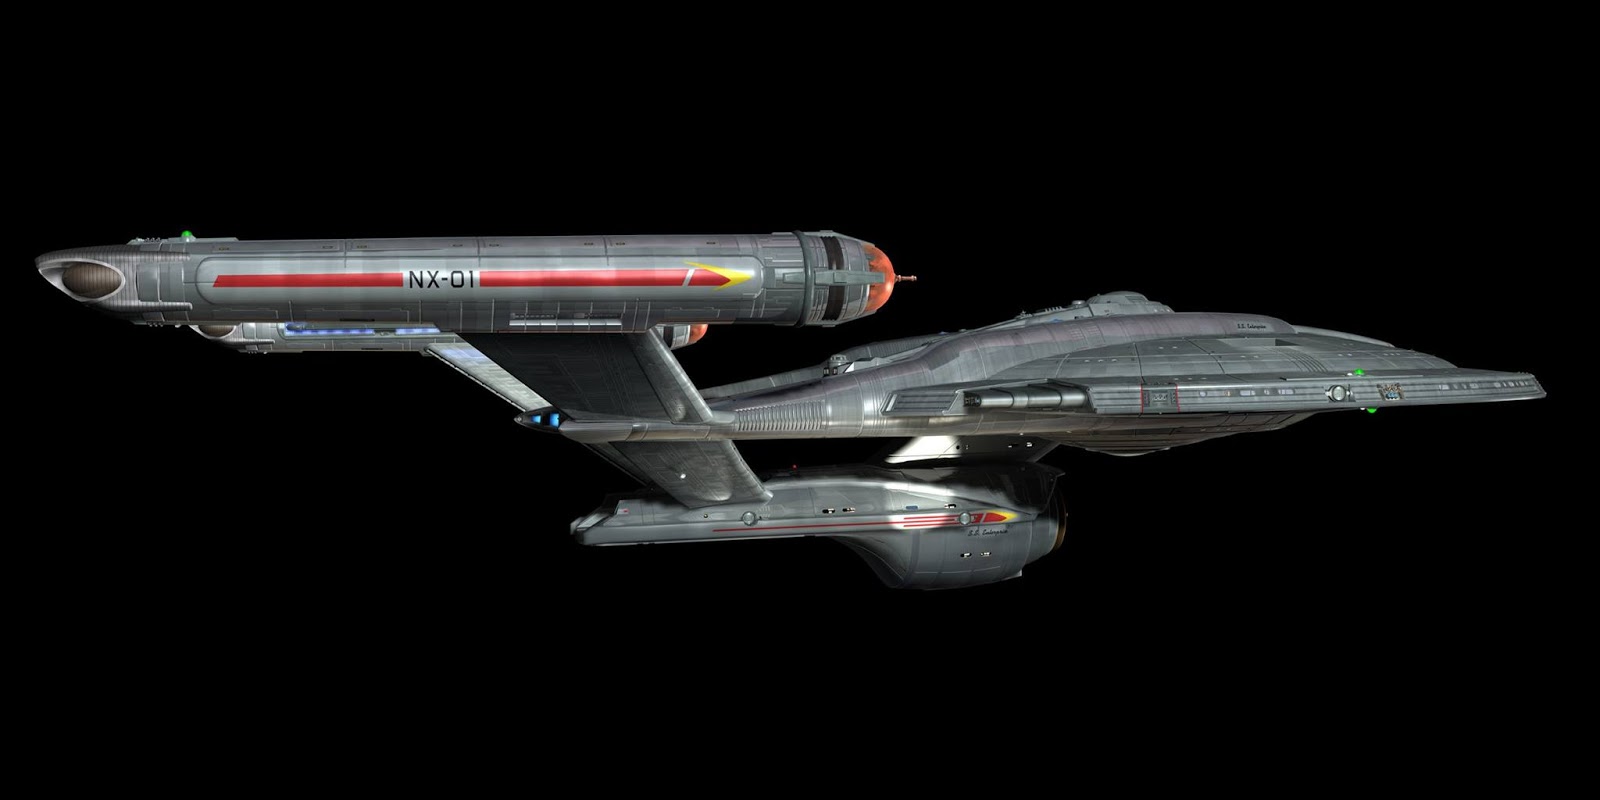 The Extended Service of The NX Class Starship (The Refiting and Extended Se...